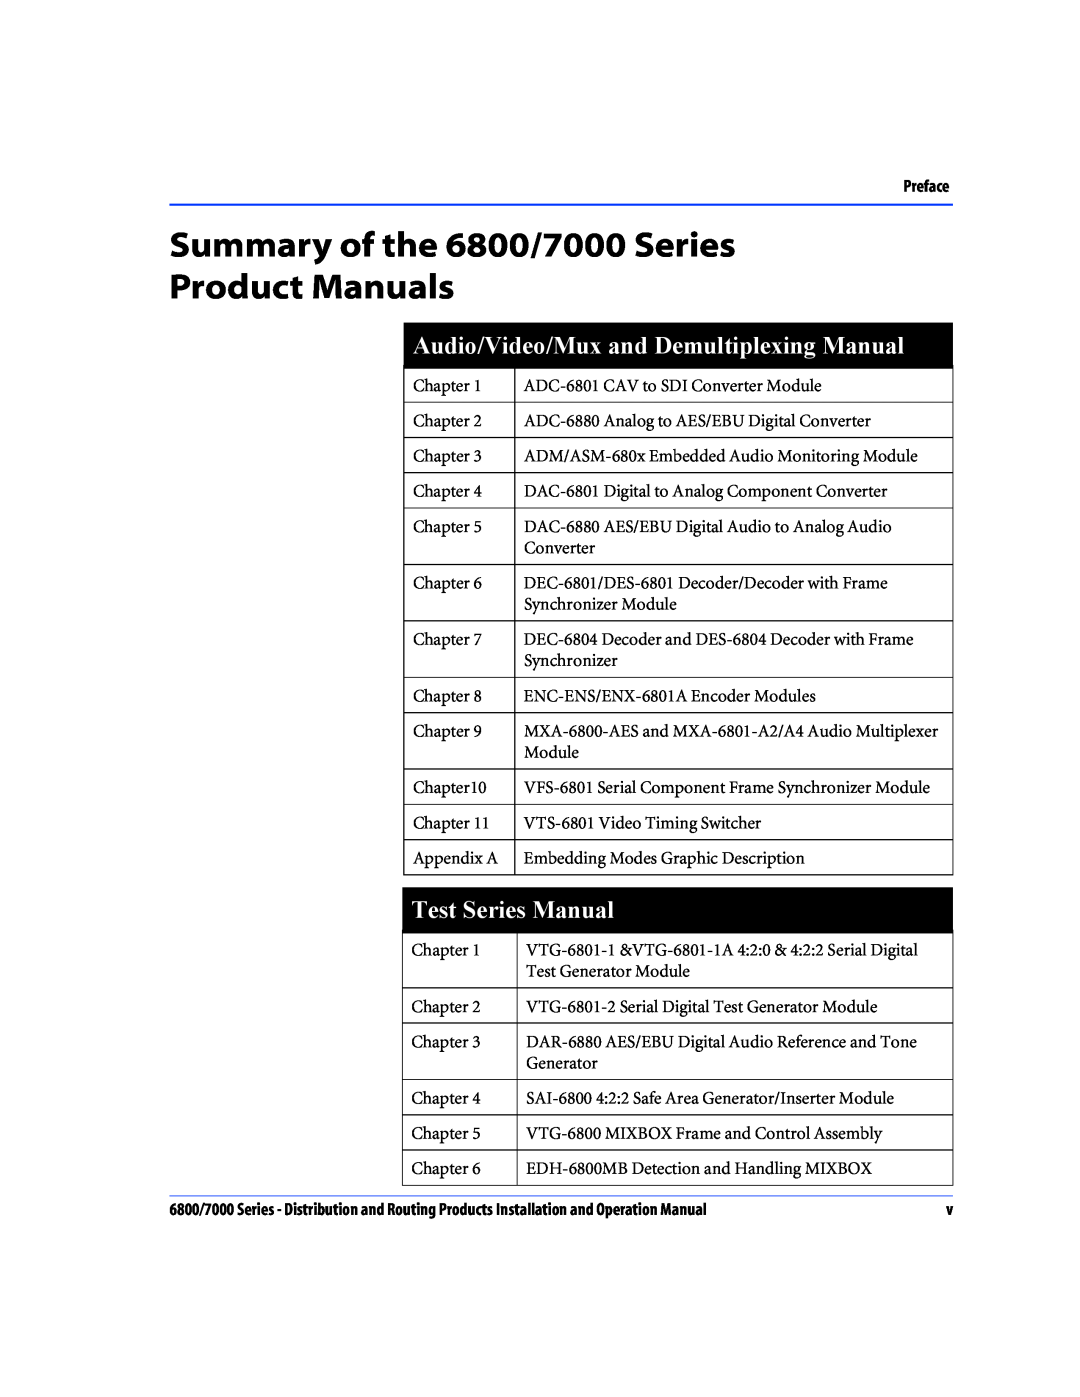 Nokia Summary of the 6800/7000 Series Product Manuals, Audio/Video/Mux and Demultiplexing Manual, Test Series Manual 